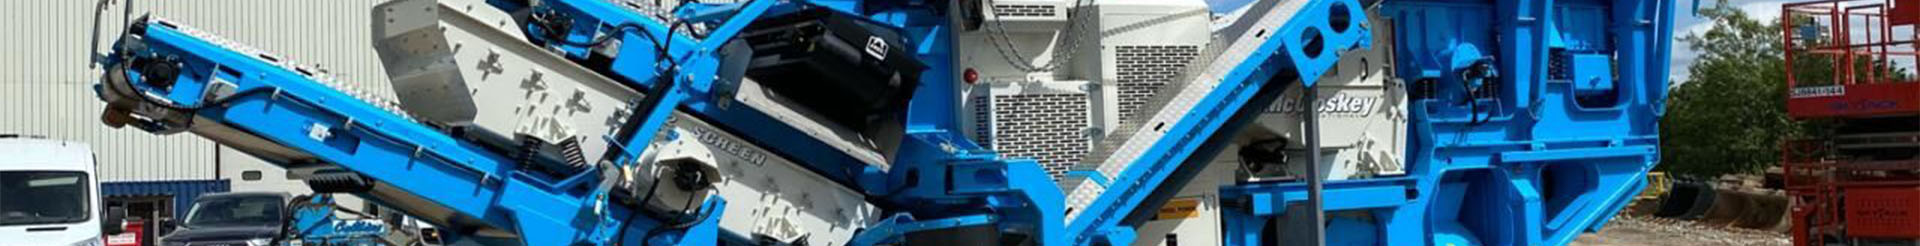 C series jaw crusher features